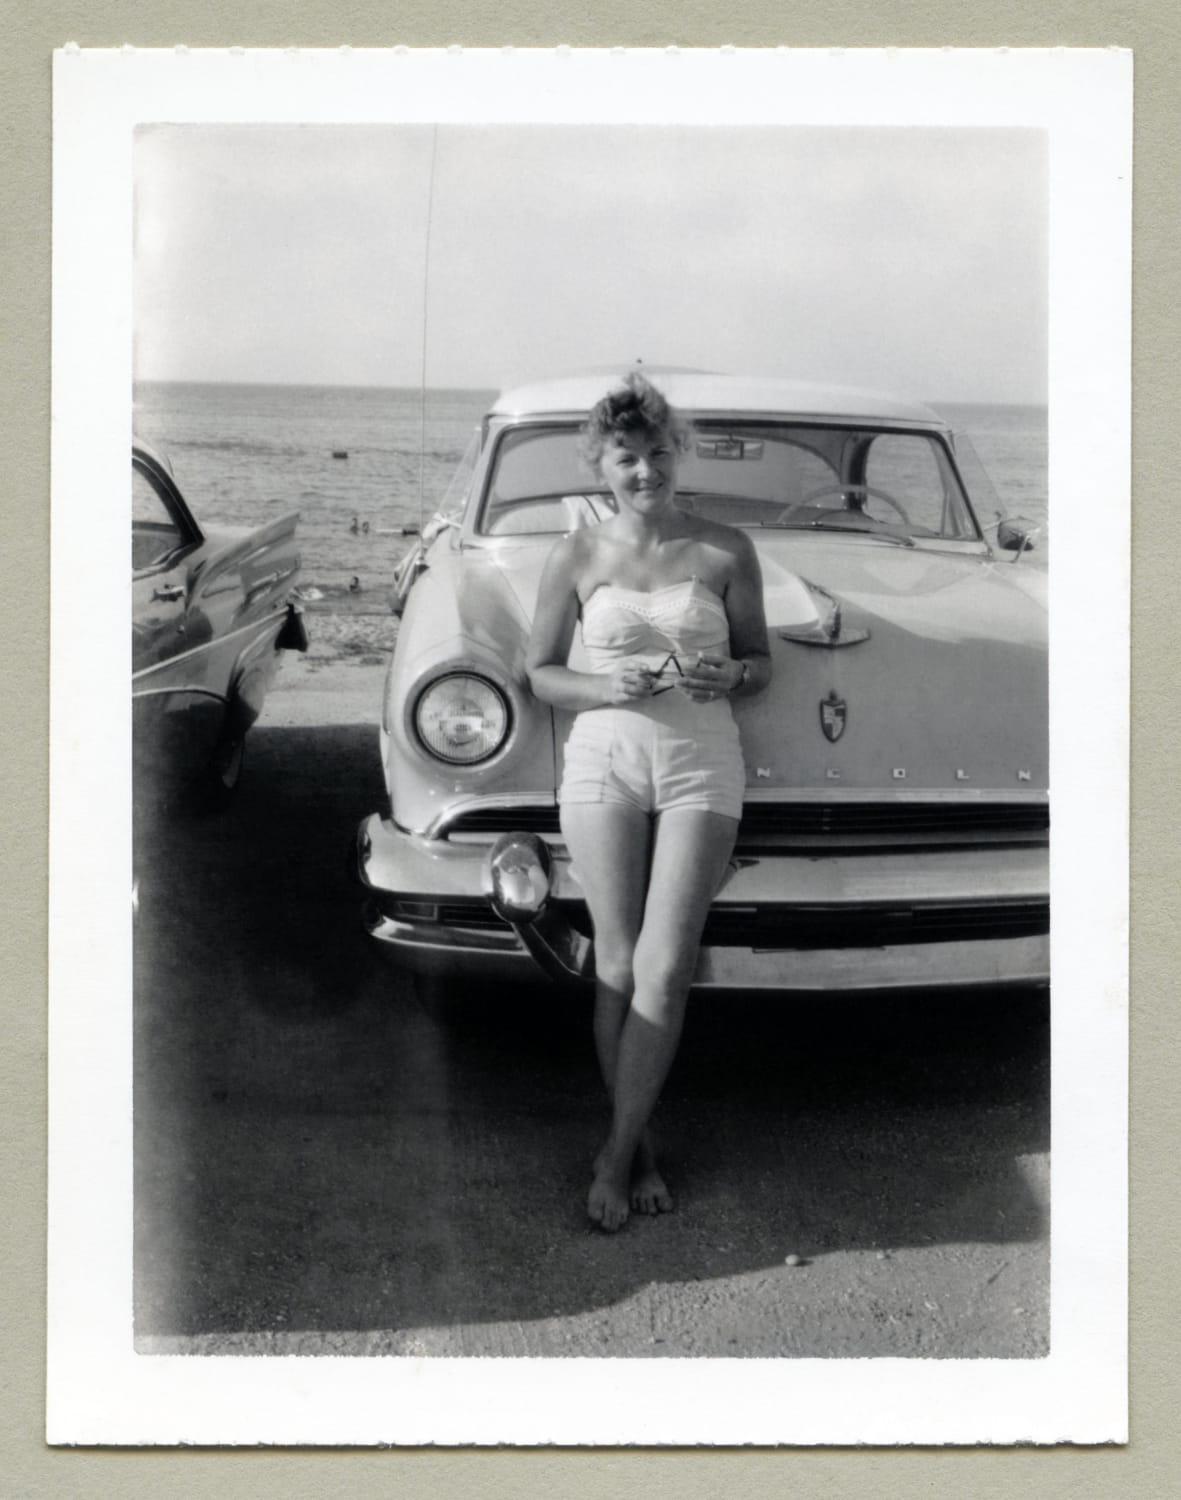 A cheerful lady posing with a 1955 Lincoln Capri on the beach. She's dressed in a strapless swimsuit in the fashion of the 1950s